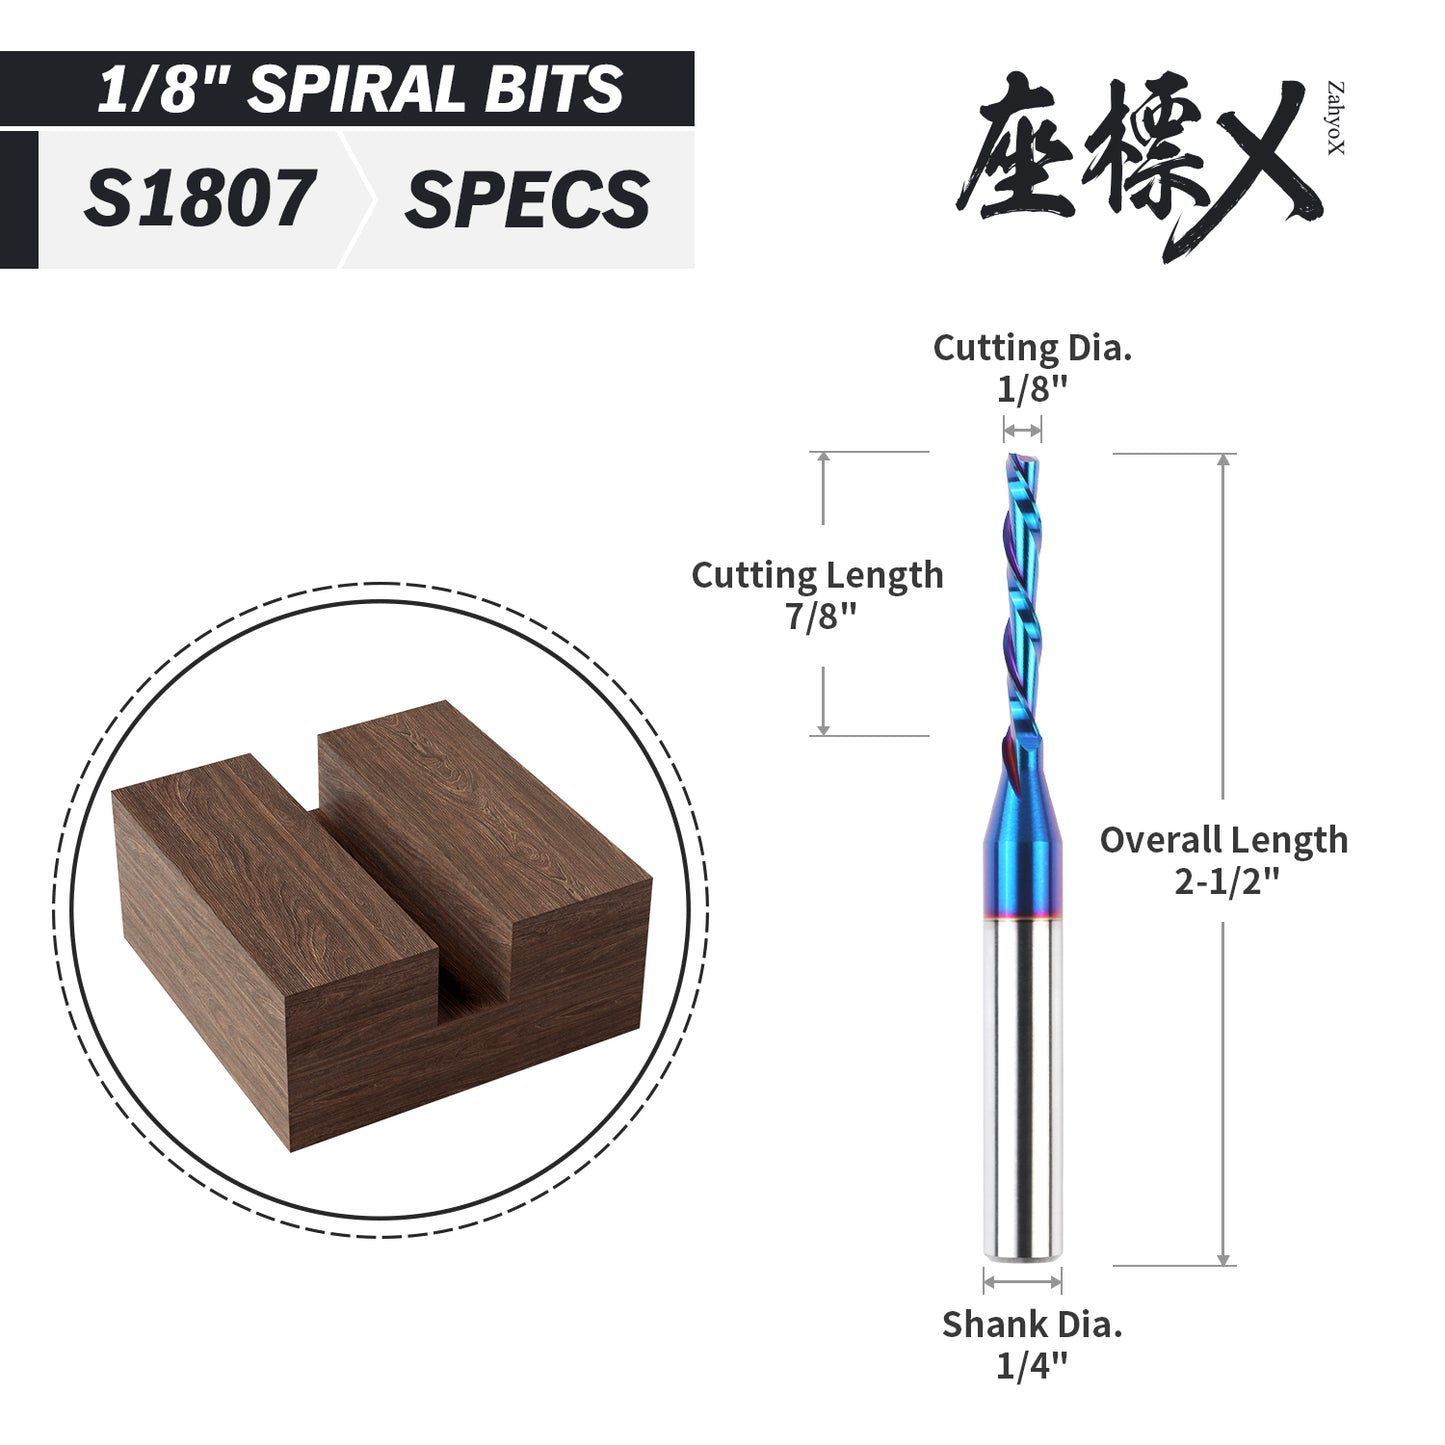 S1807 Solid Carbide nACo Coated Downcut Spiral Router Bit - 2Flutes - 1/4 SD - 1/8 CD - 7/8 CL - 2-1/2 OL